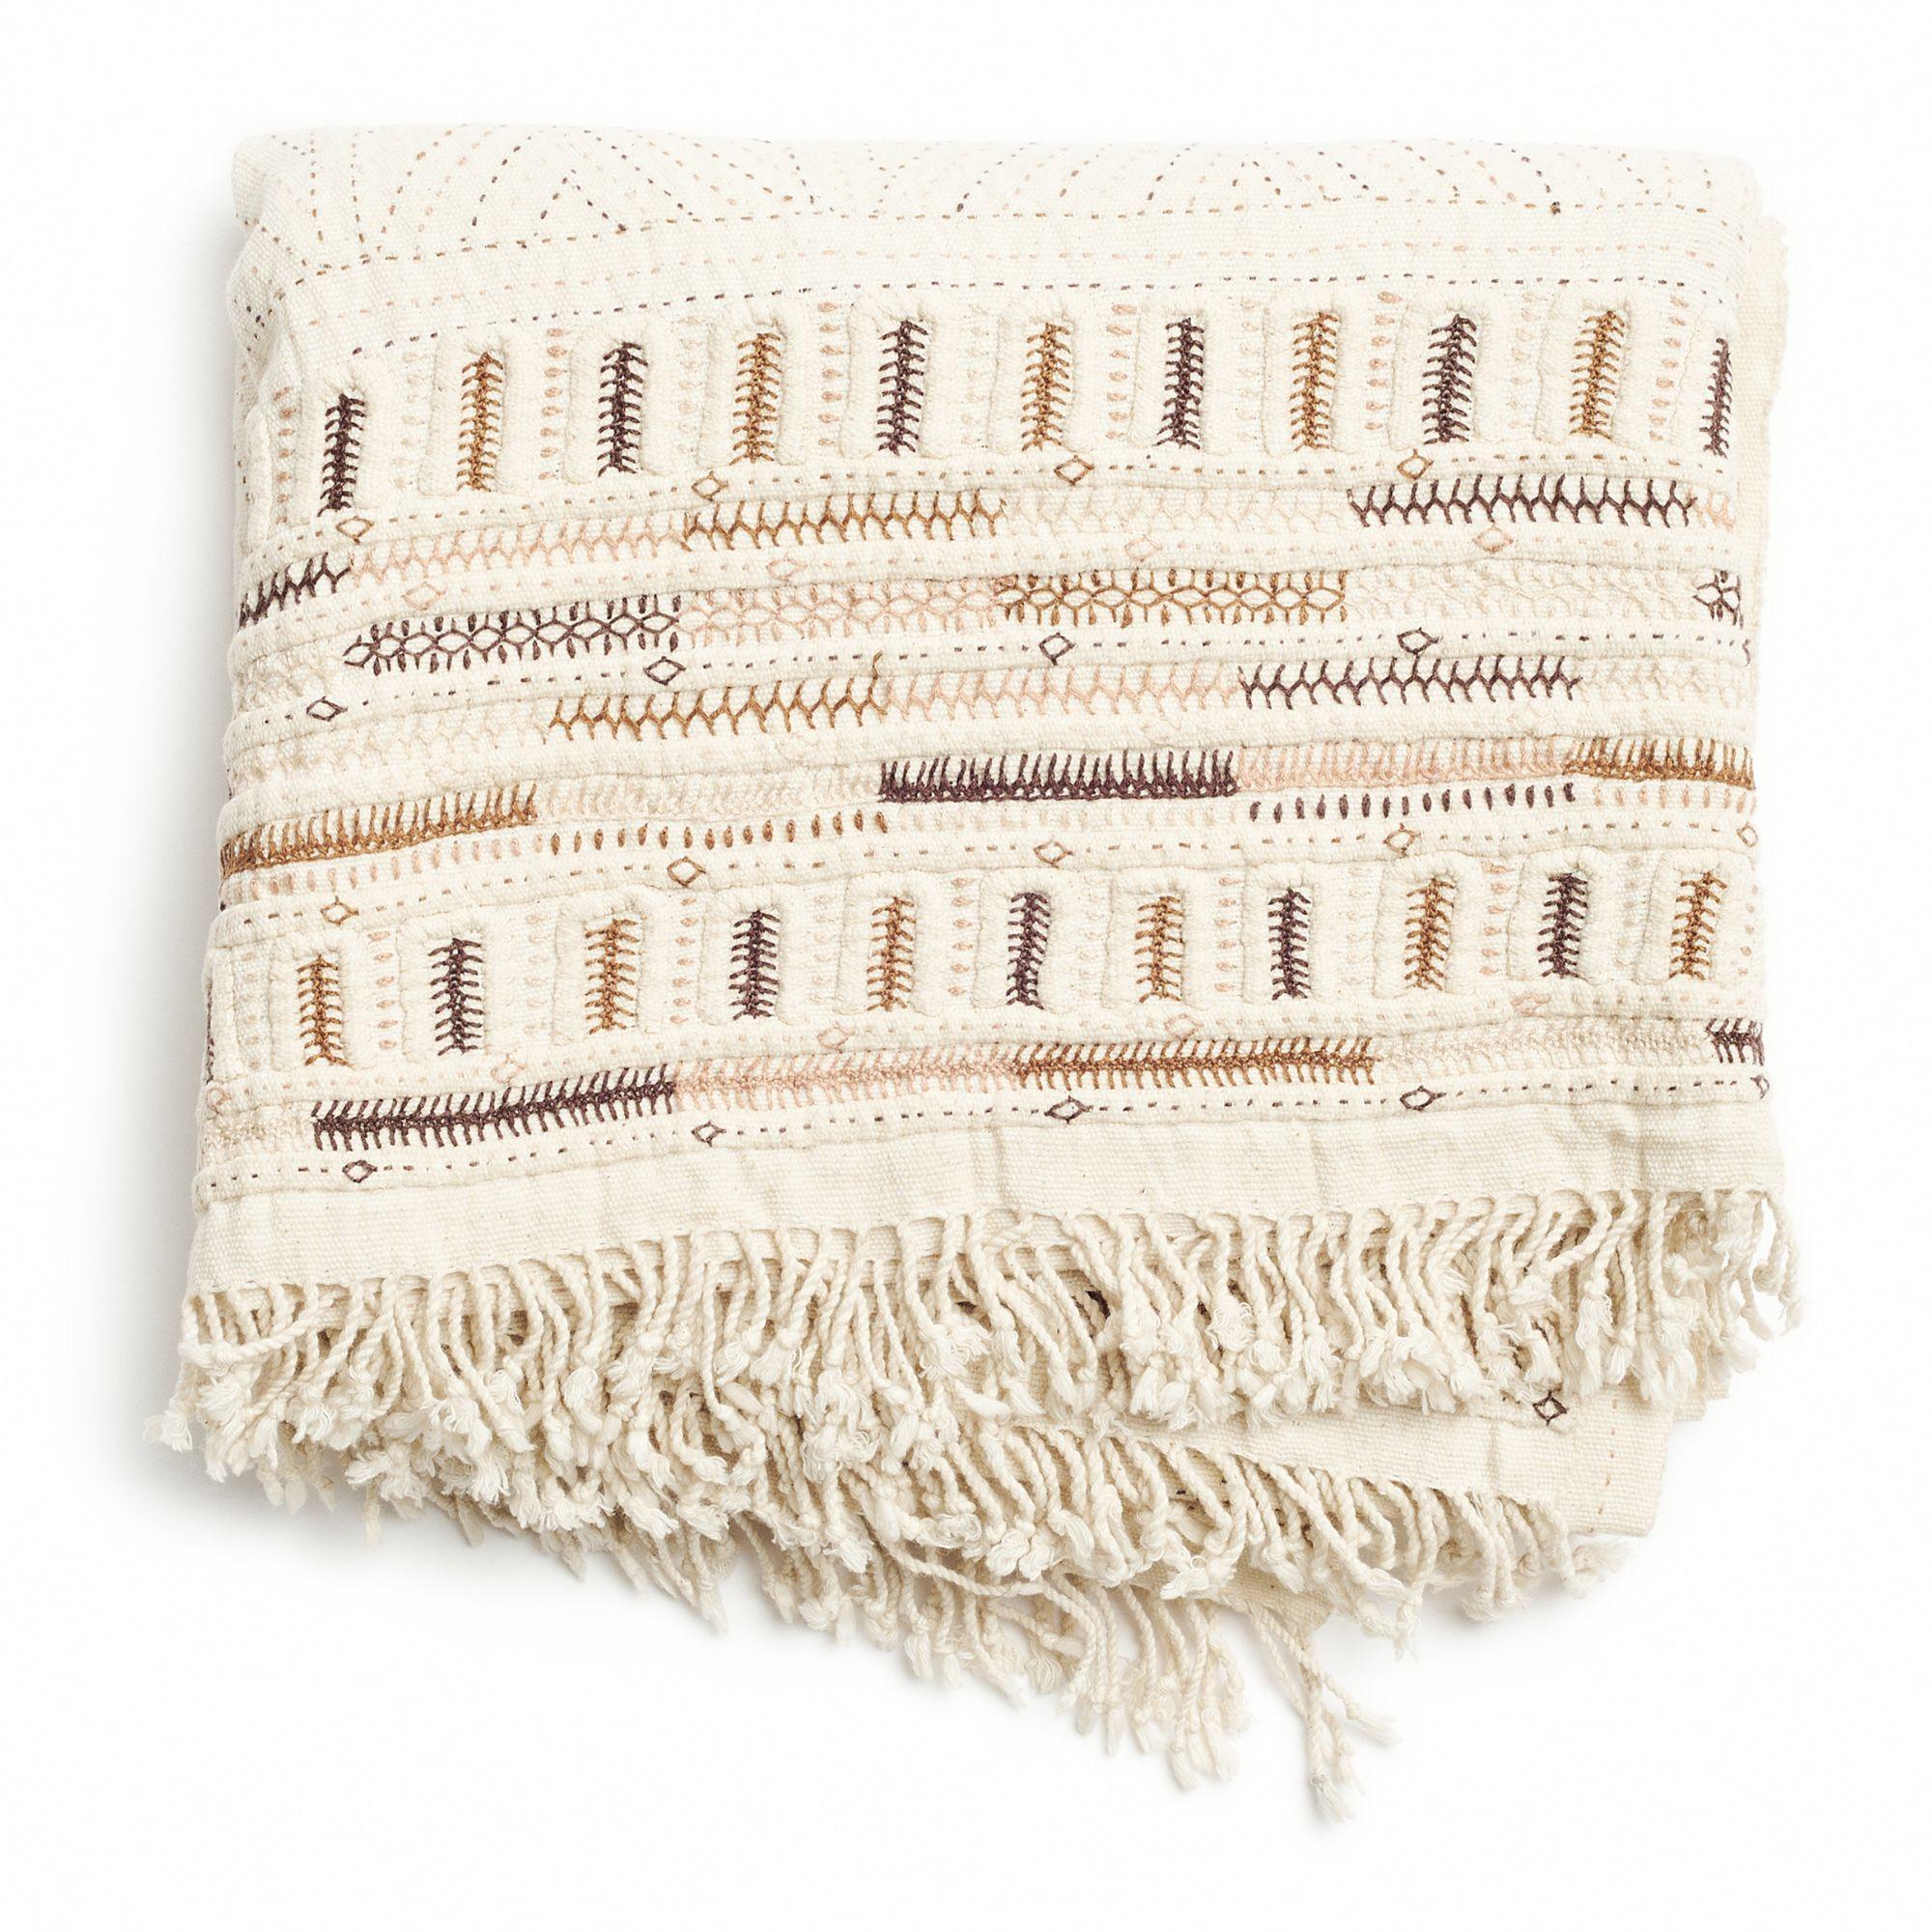 Indian Unah Earthy Throw , Minimally Hand Embroidered in Intricate Patterns by Artisans For Sale